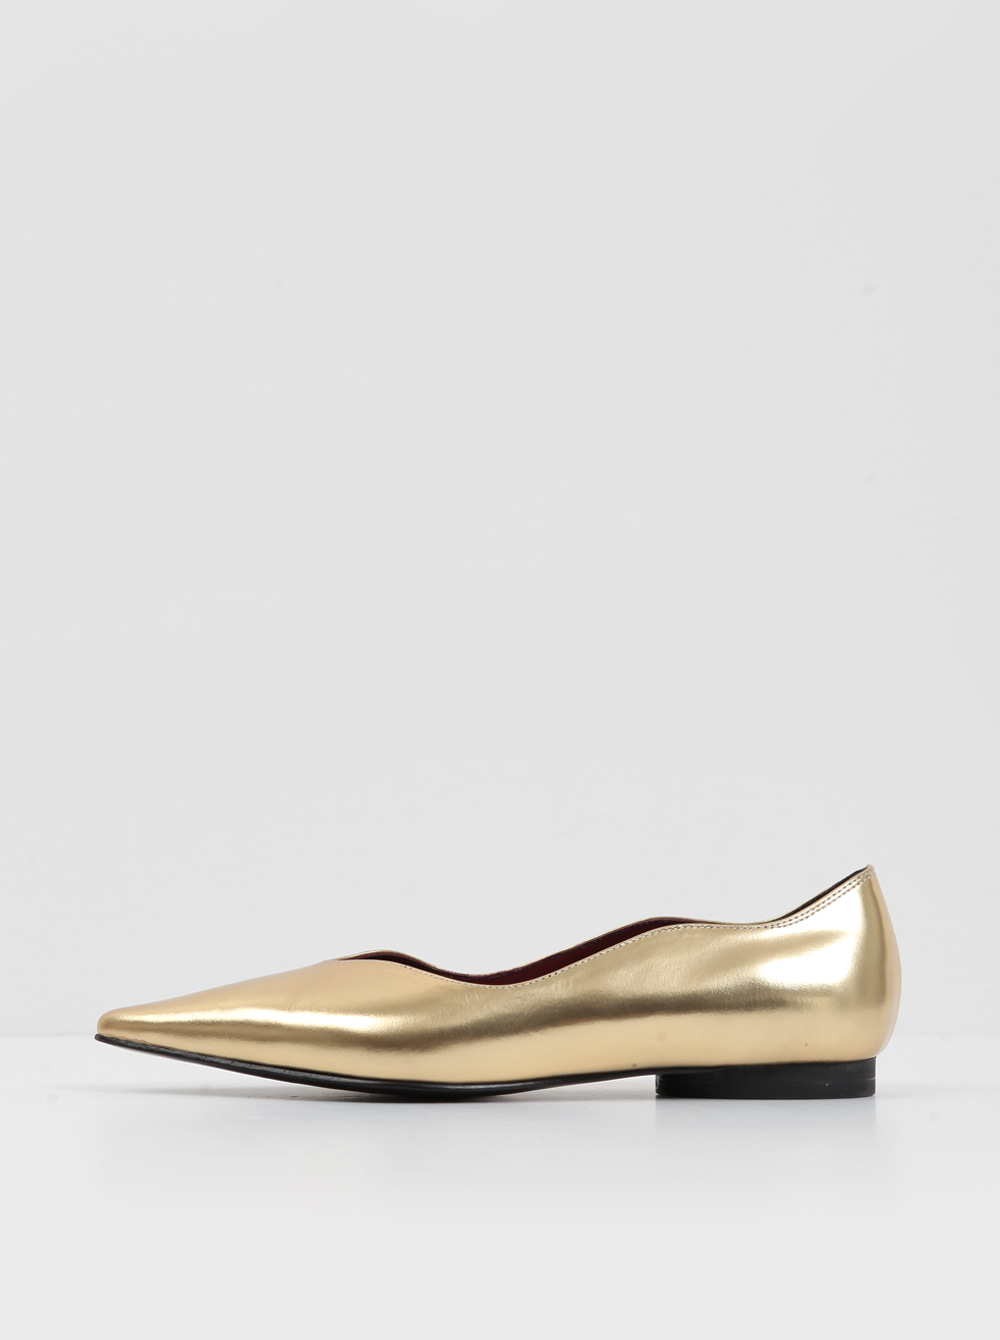 [PRE-ORDER 10%] WAVE FLAT GOLD ■ 7월 29일 순차발송 / 8월 8일 발송 완료